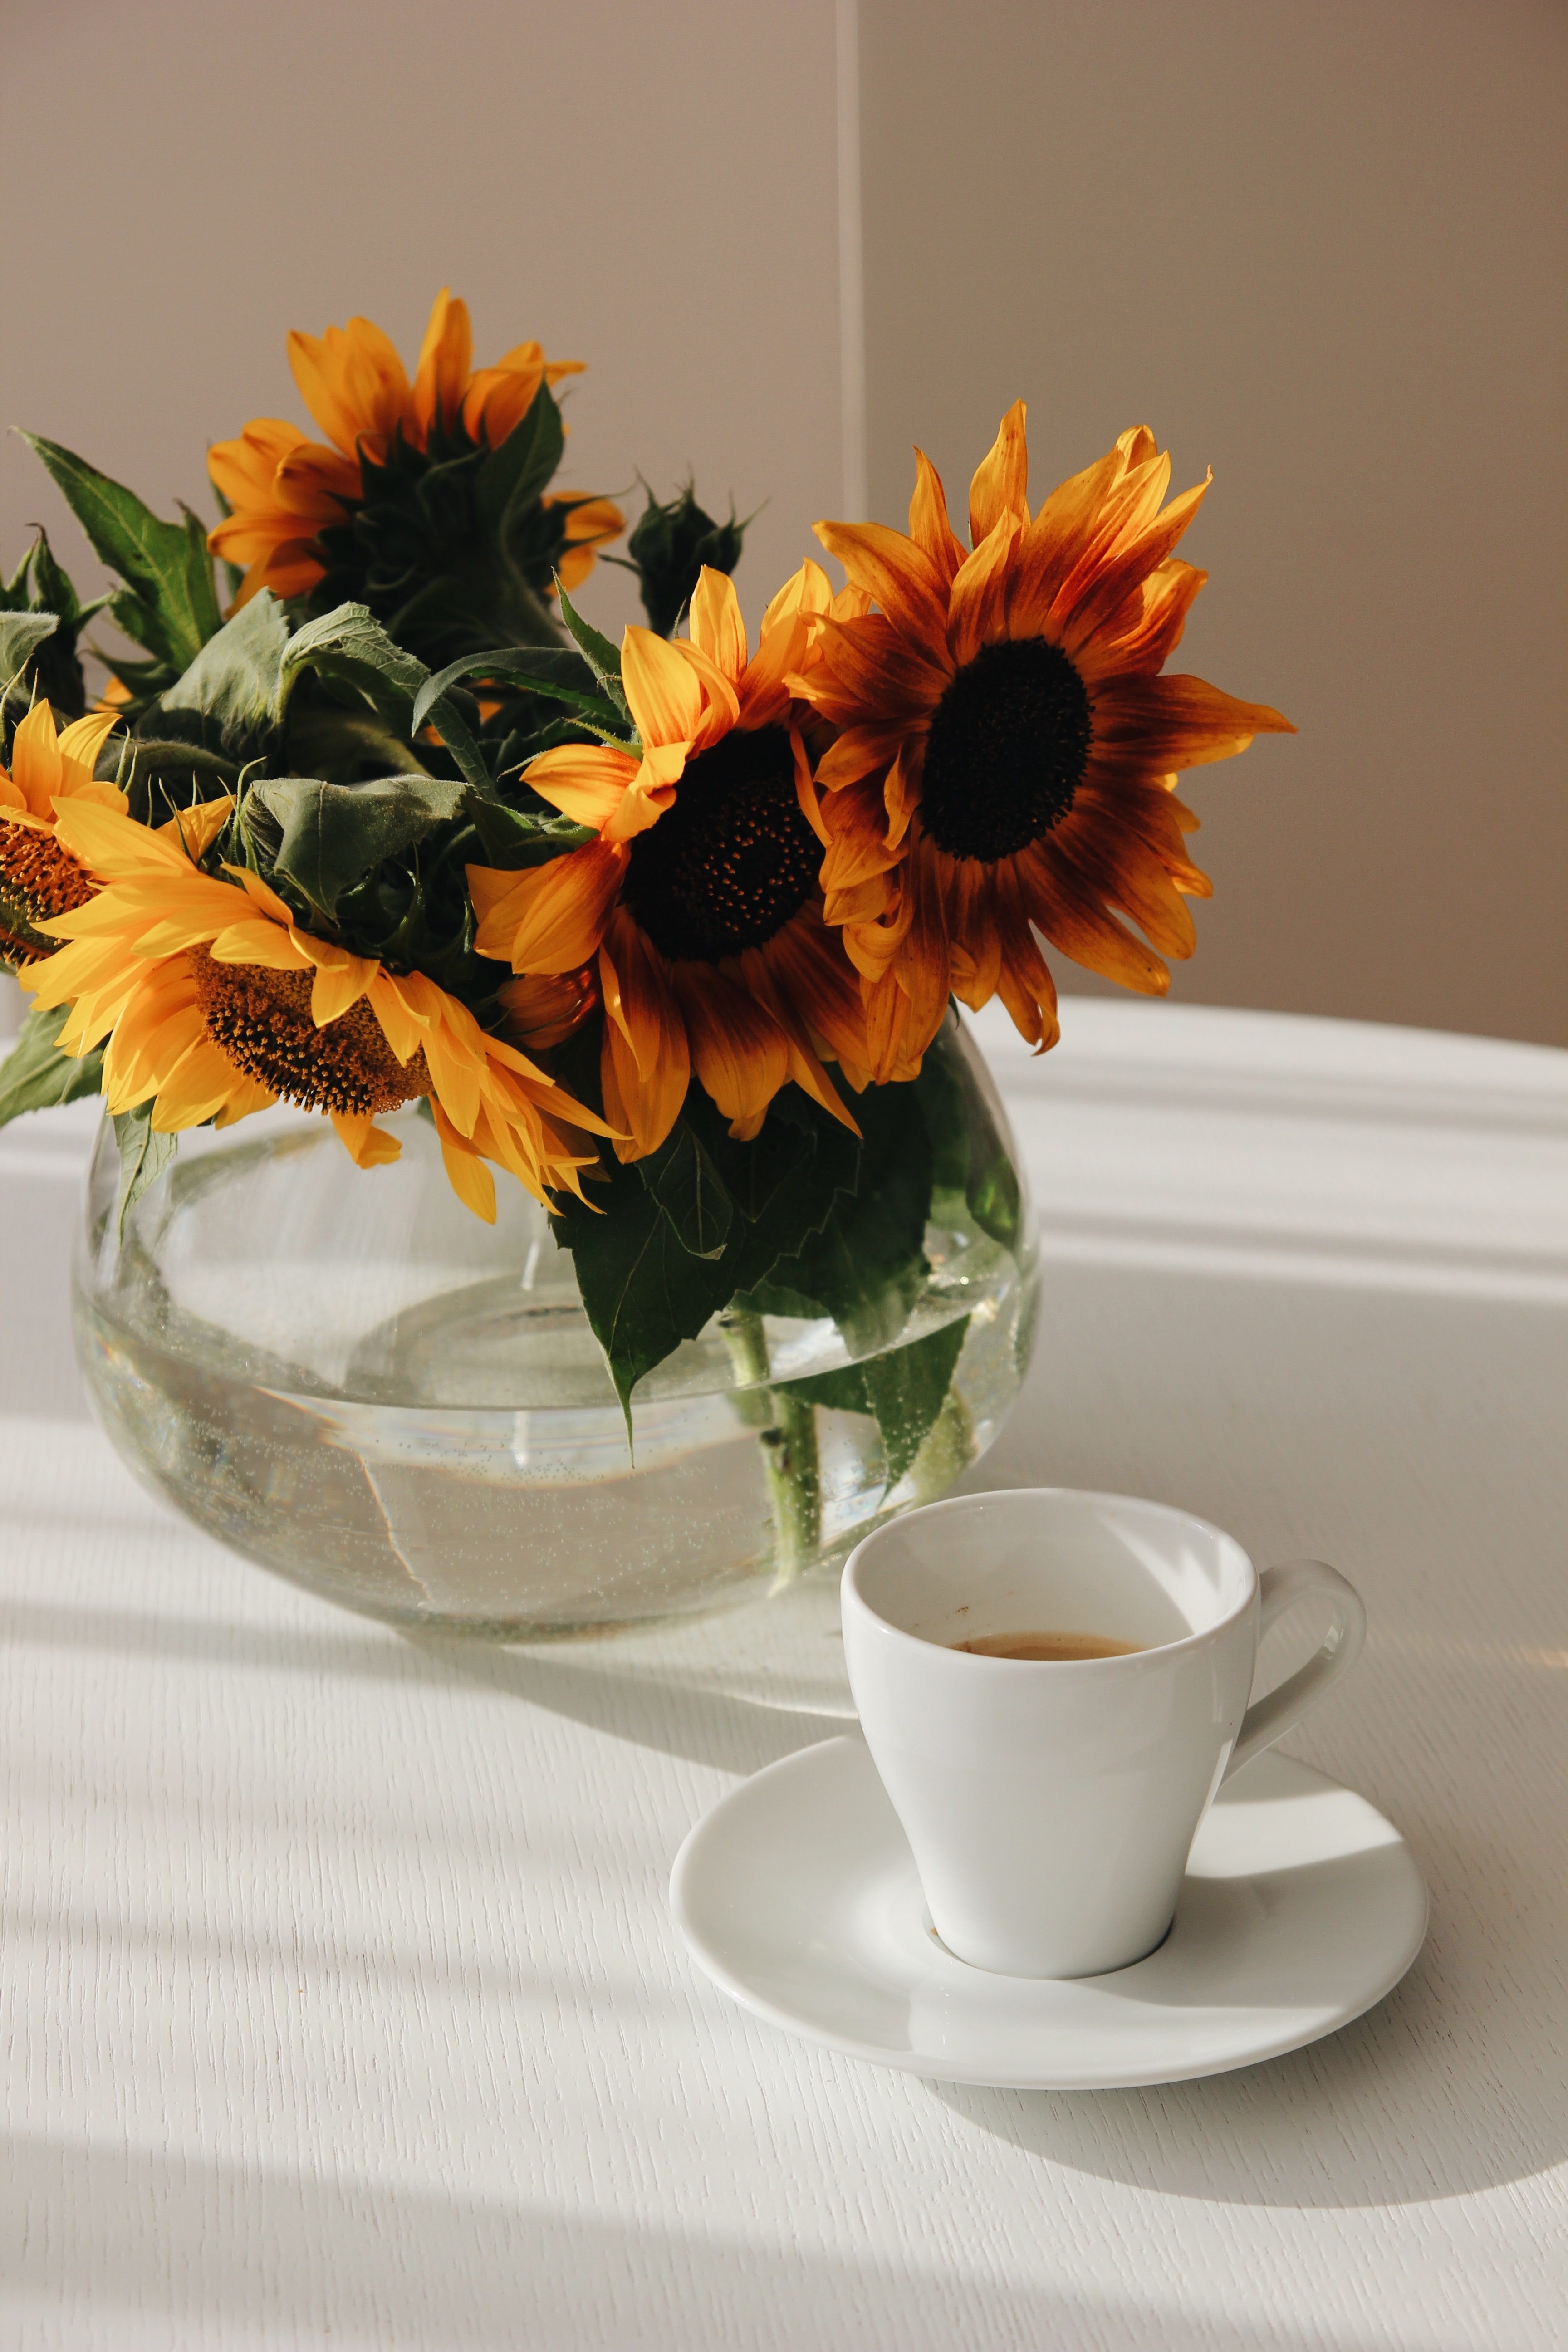 sunflowers, cup, flowers, bouquet, table, vase lock screen backgrounds